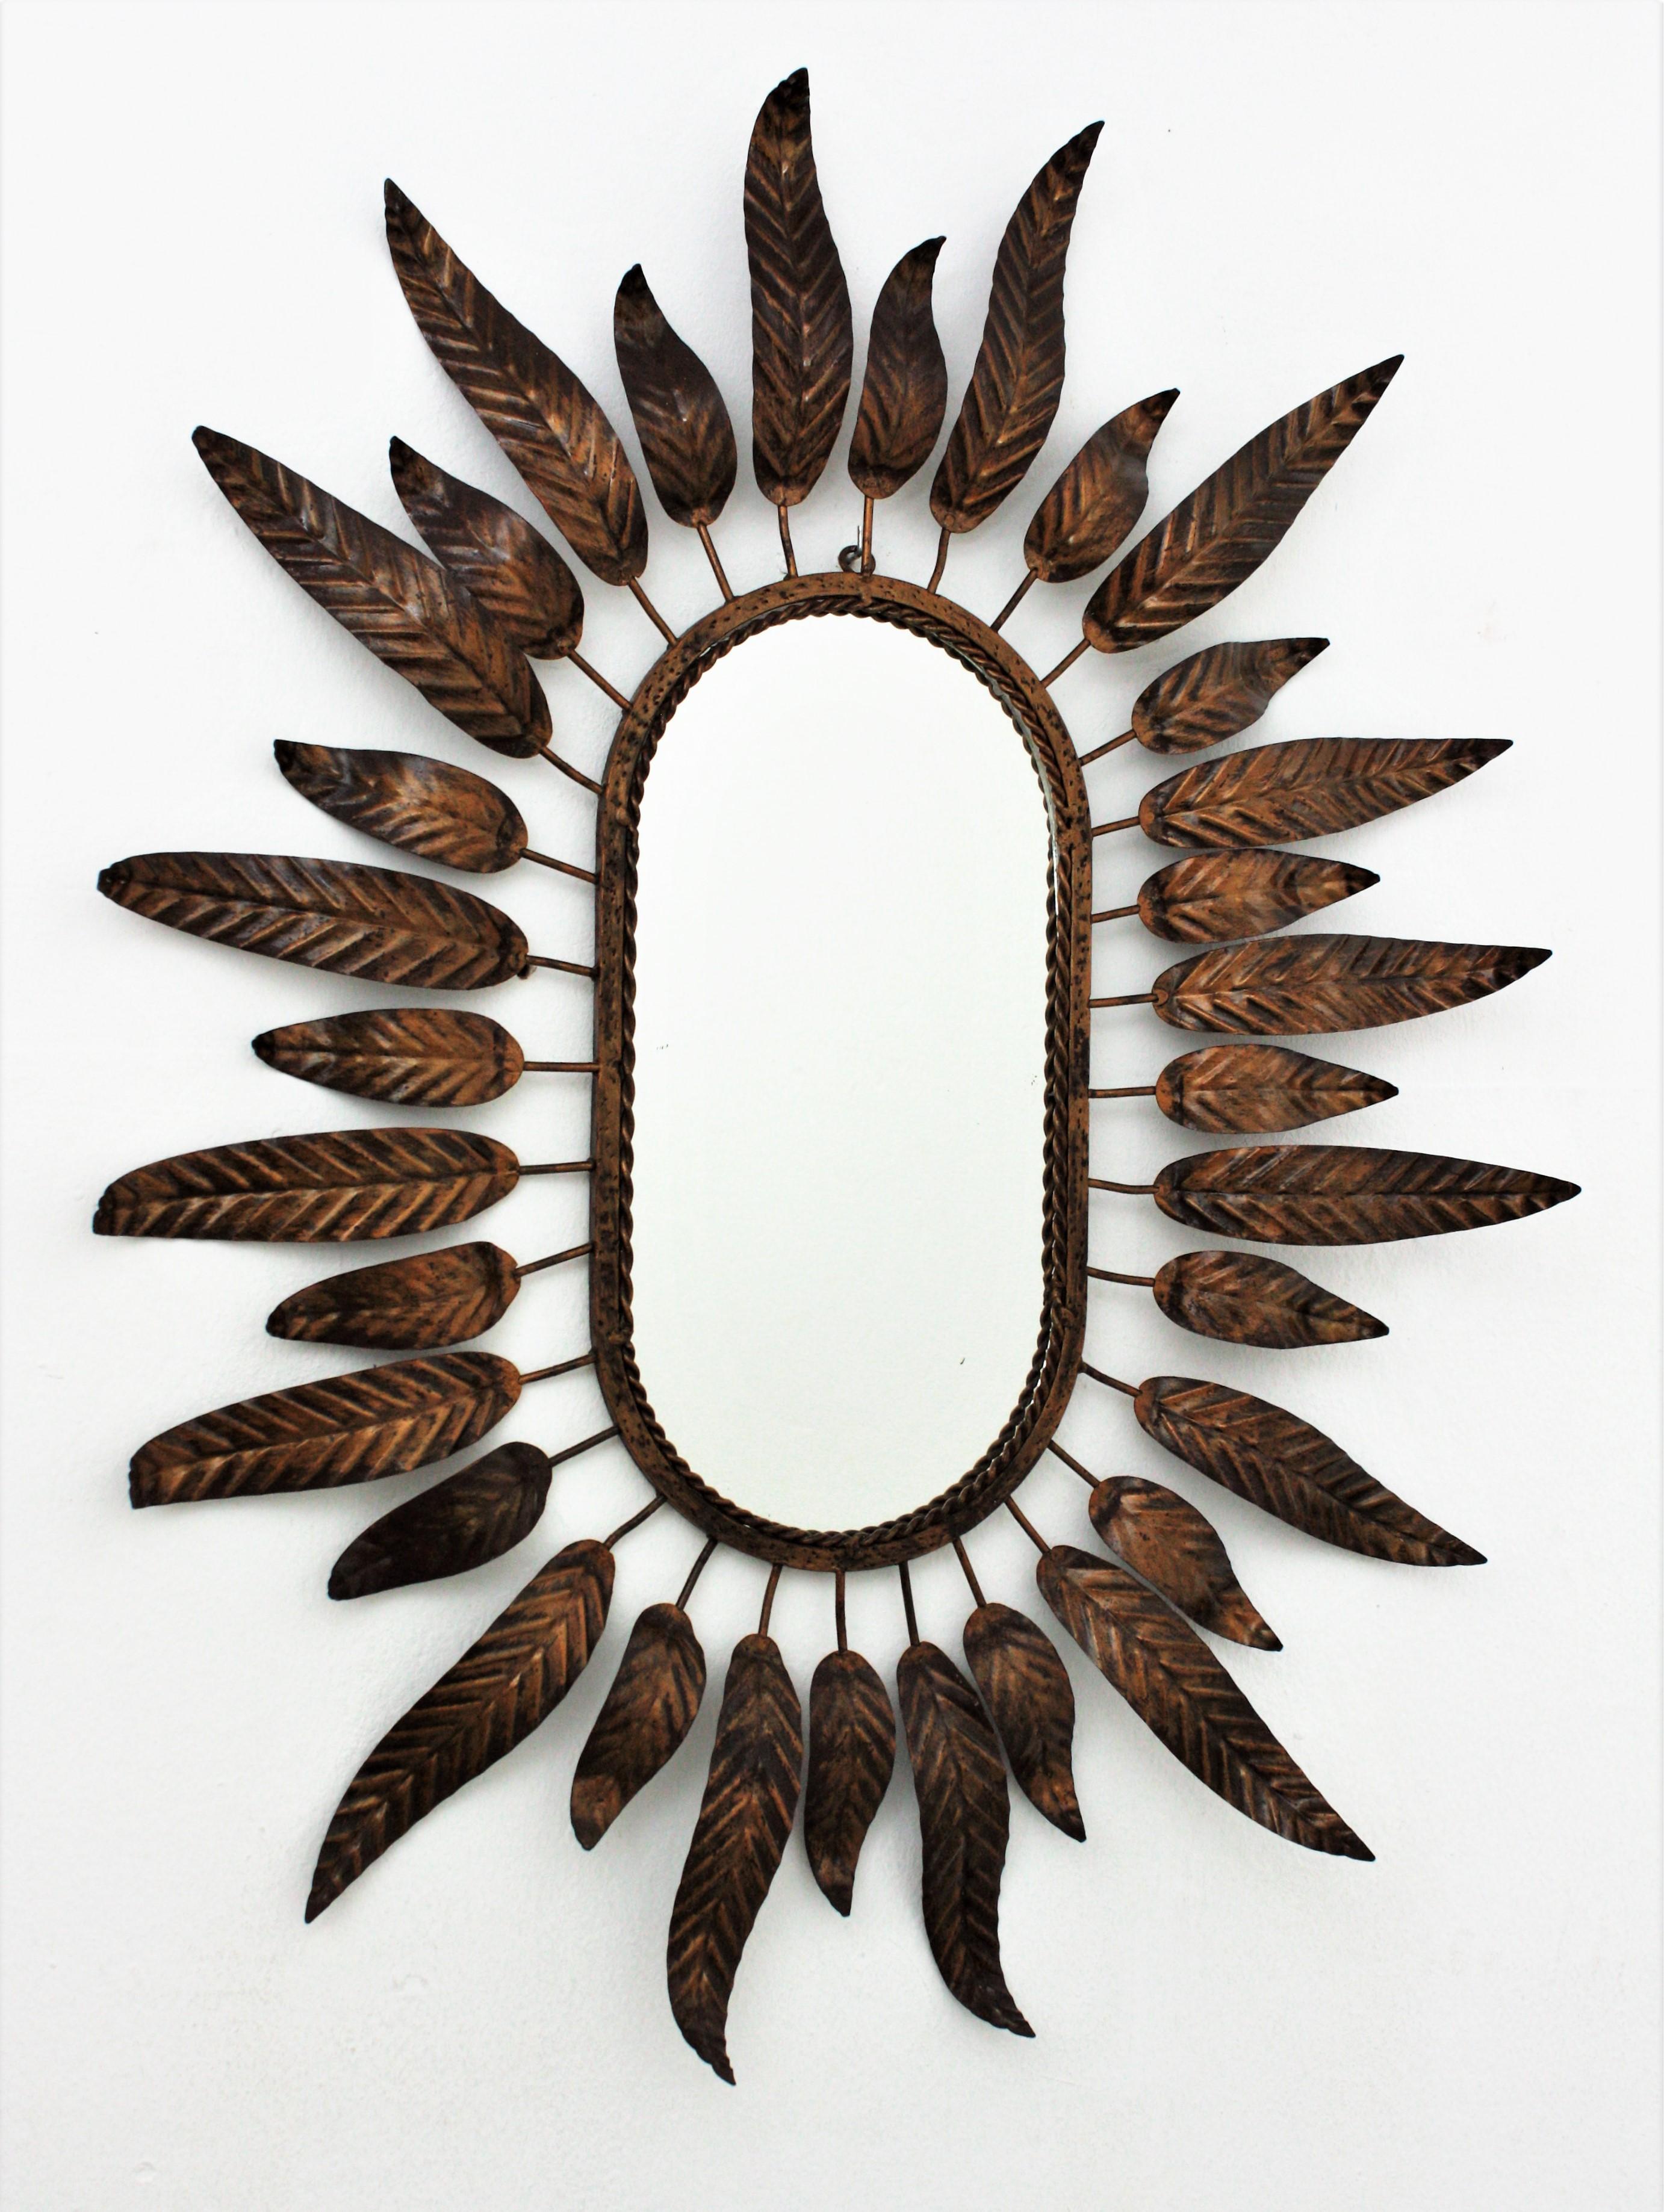 Gilt metal sunburst mirror framed with leaves in bronze, parcel-gilt color. Spain, 1950s-1960s.
A highly decorative oval sunburst or flower burst mirror framed with elegant curved leaves in two sizes.
This mirror is in excellent vintage condition